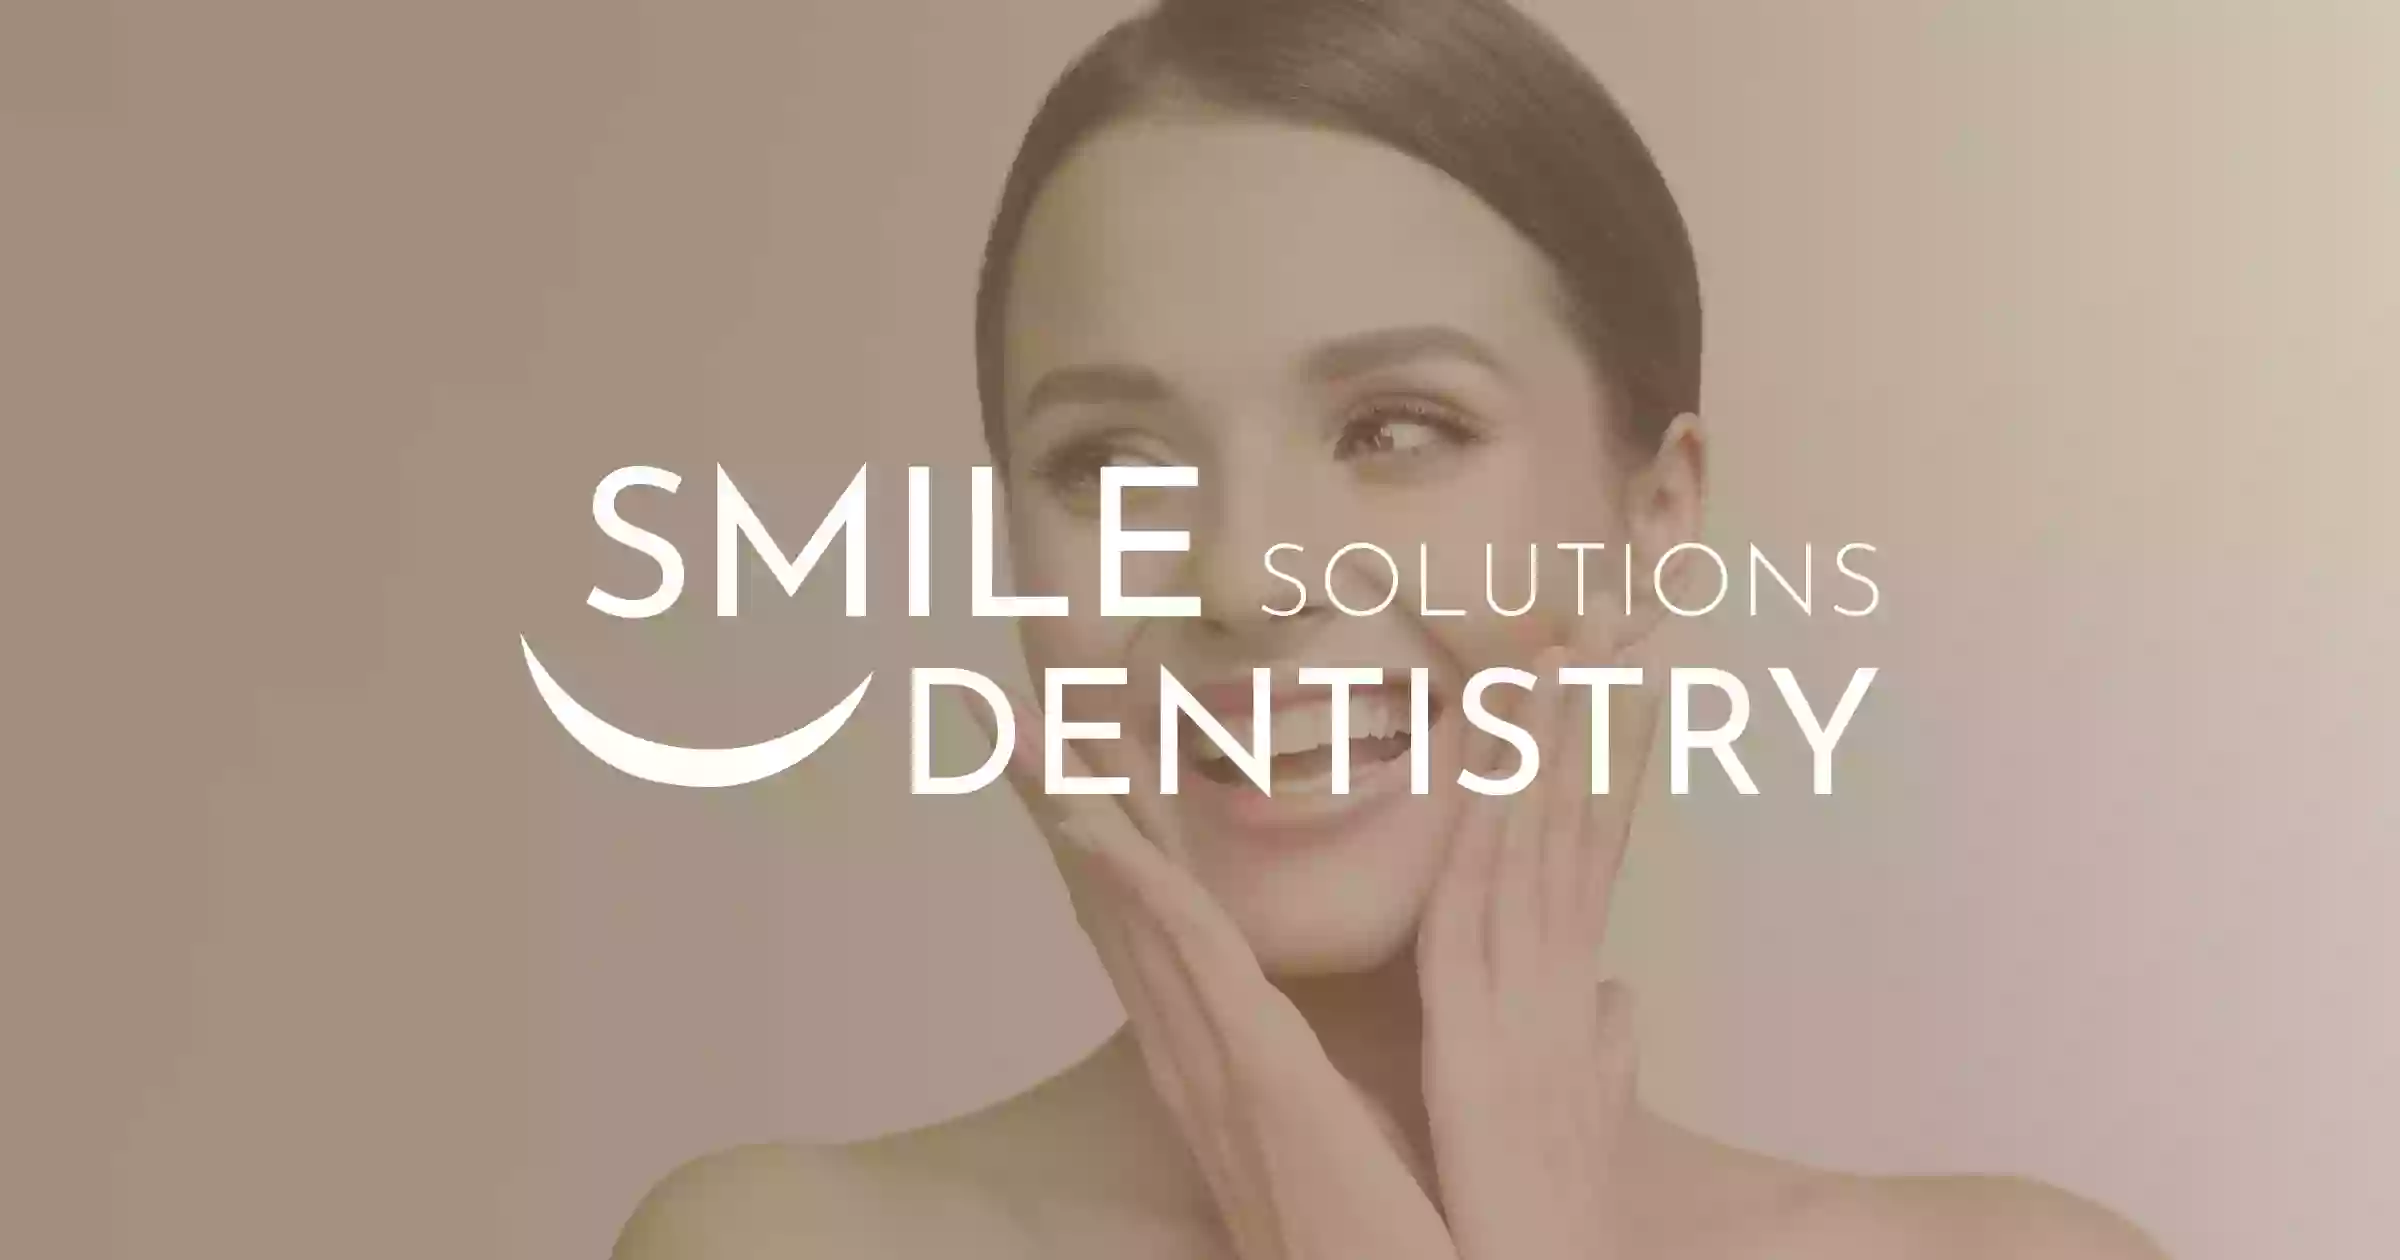 Smile Solutions Dentistry, PLLC